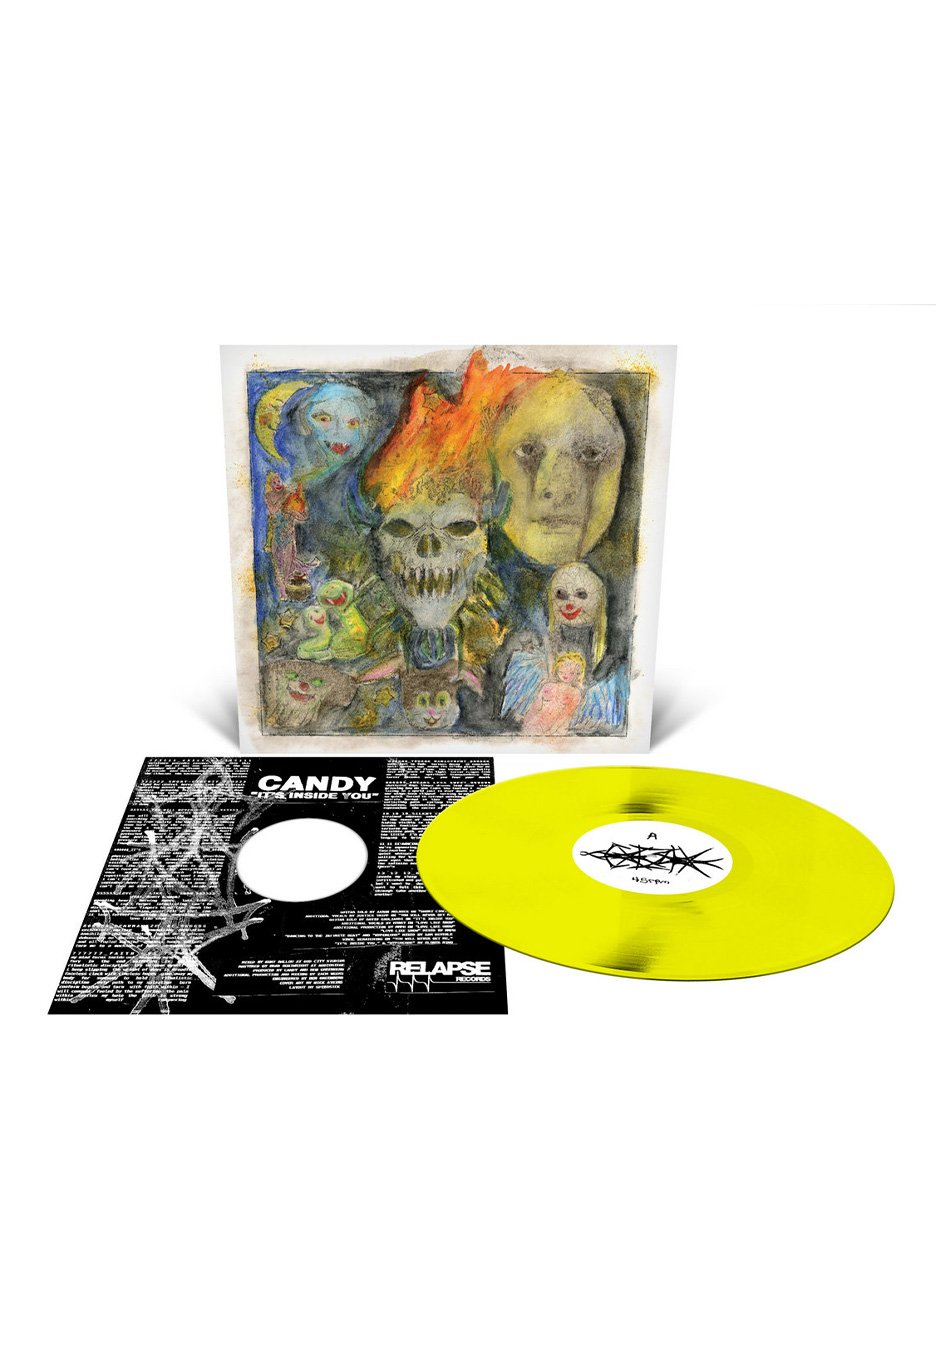 Candy - It's Inside You Ltd. Neon Yellow - Colored Vinyl